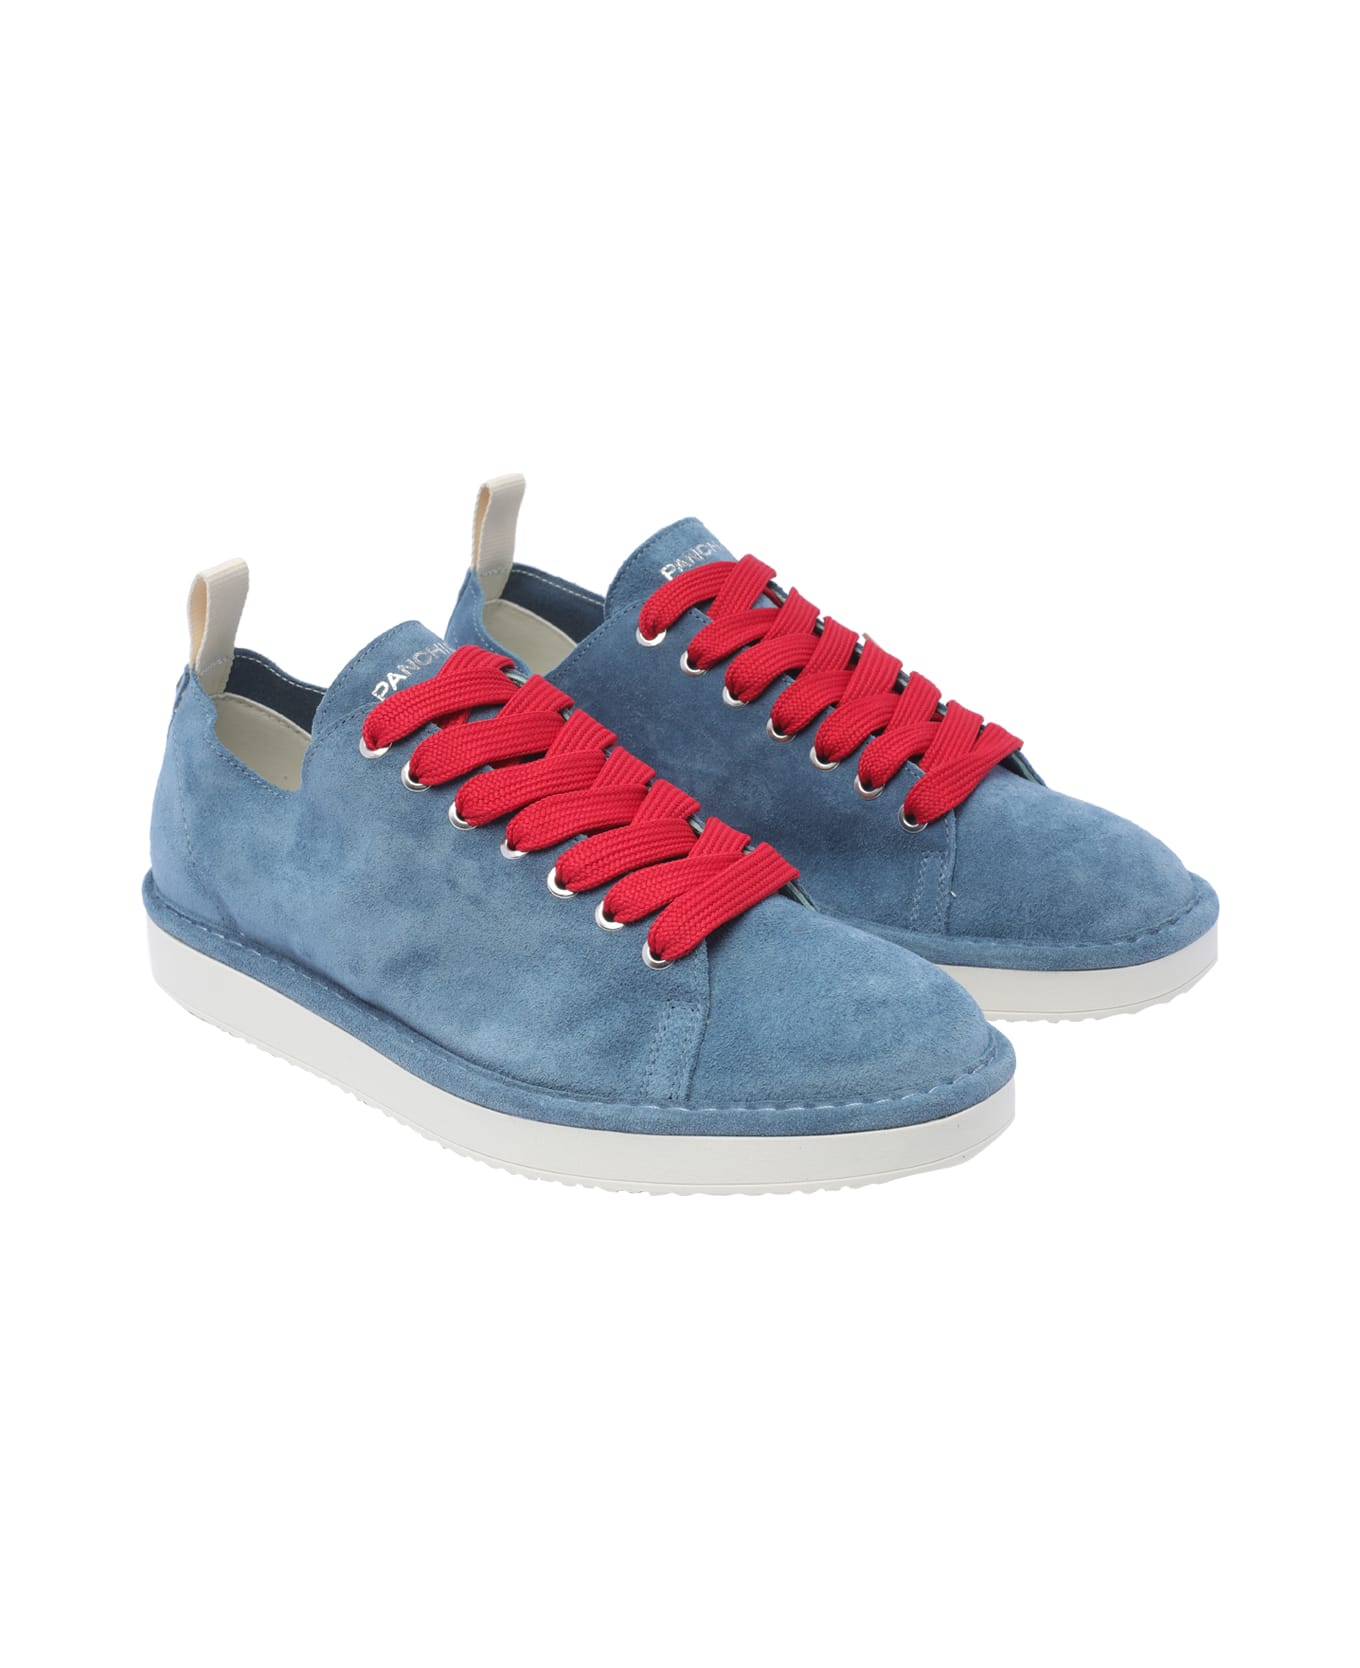 Panchic P01 Laced Up Shoes - Blue スニーカー